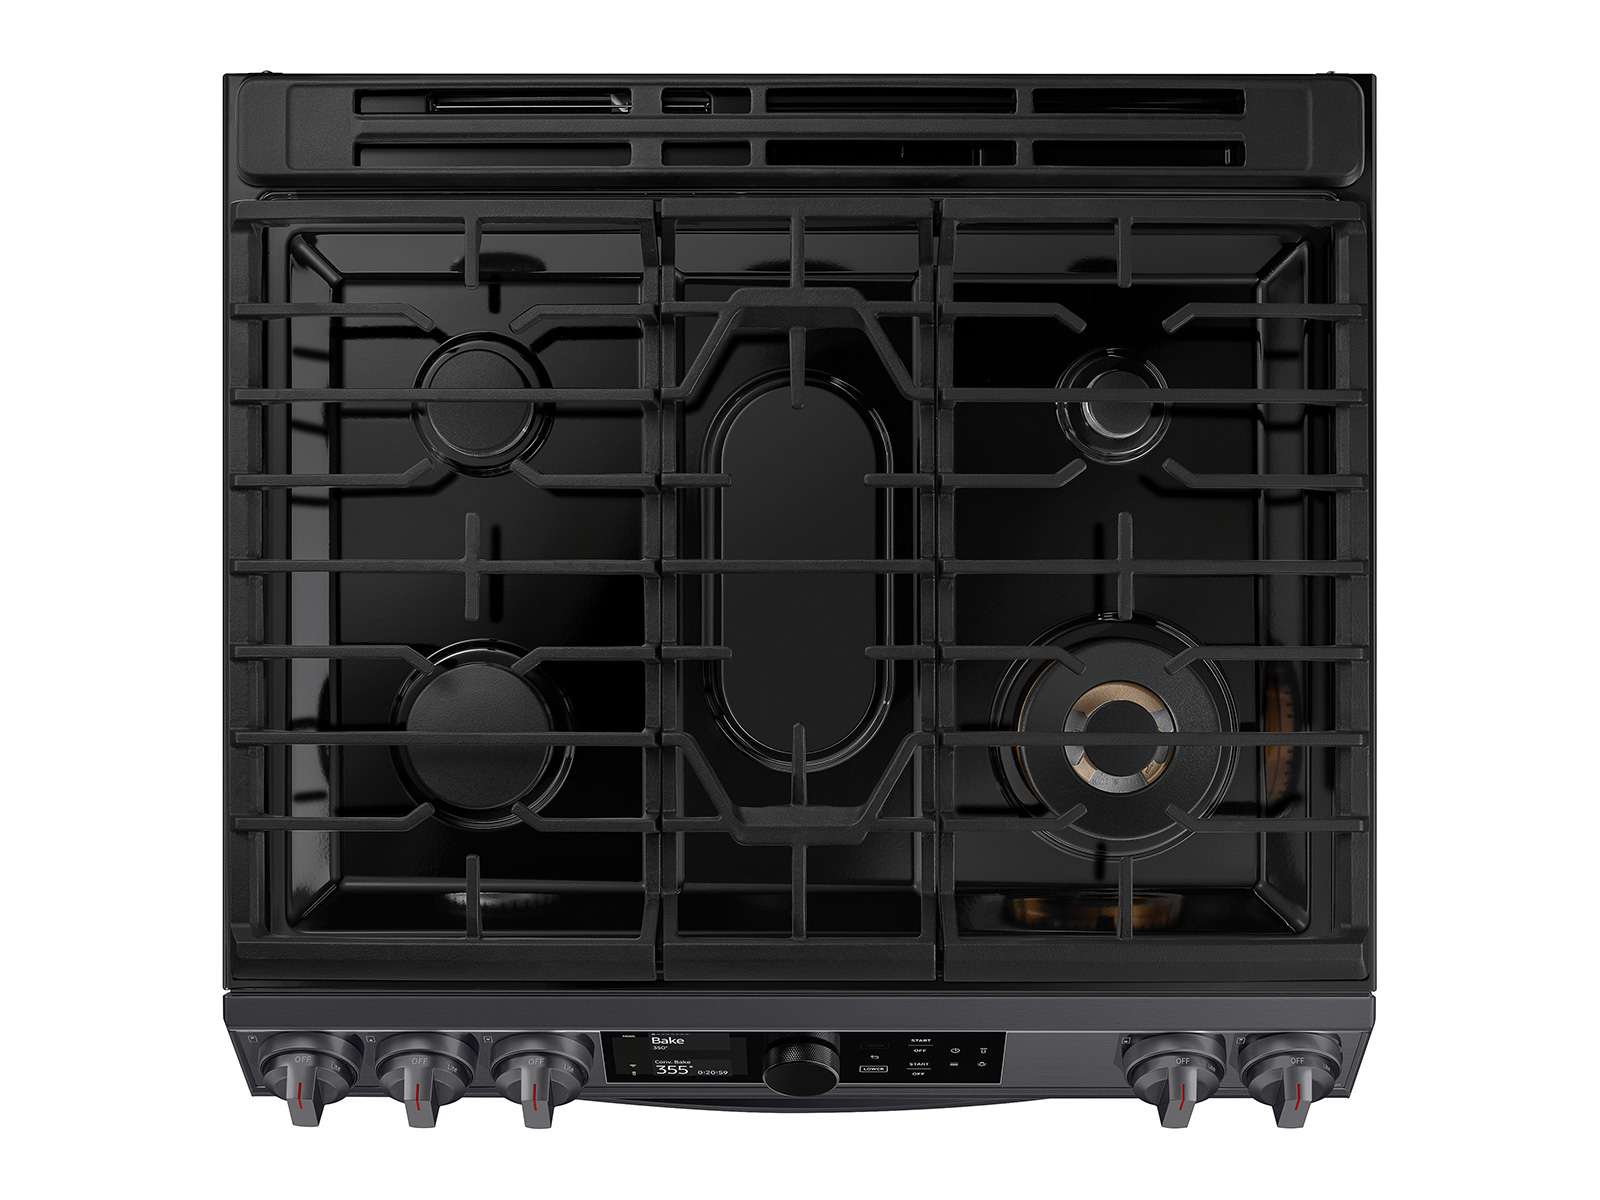 Thumbnail image of 6.3 cu. ft. Flex Duo™ Front Control Slide-in Dual Fuel Range with Smart Dial, Air Fry, and Wi-Fi in Black Stainless Steel